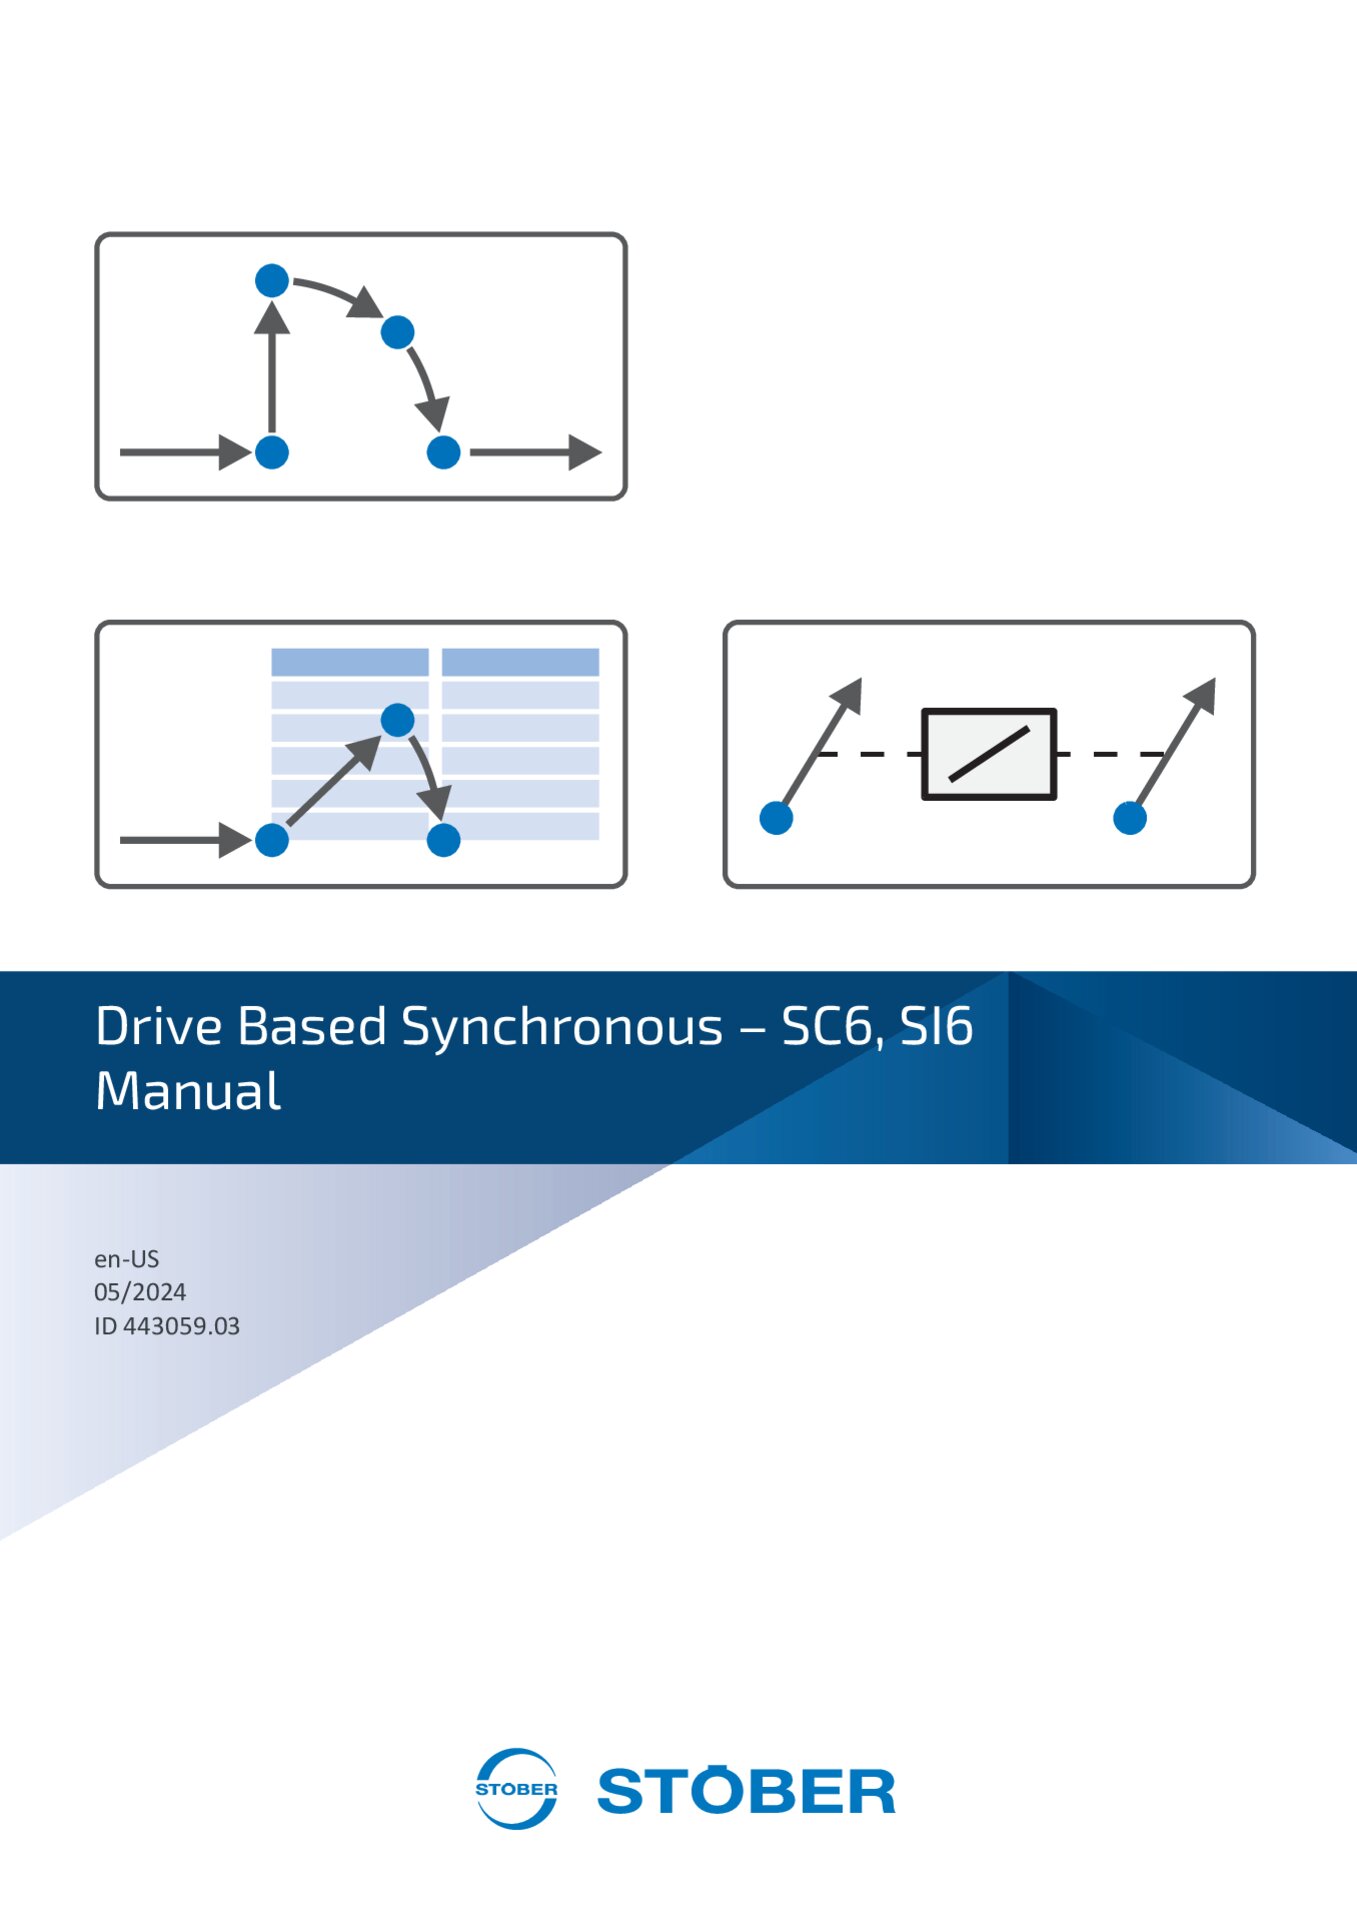 Manual Drive Based Synchronous – SC6 SI6